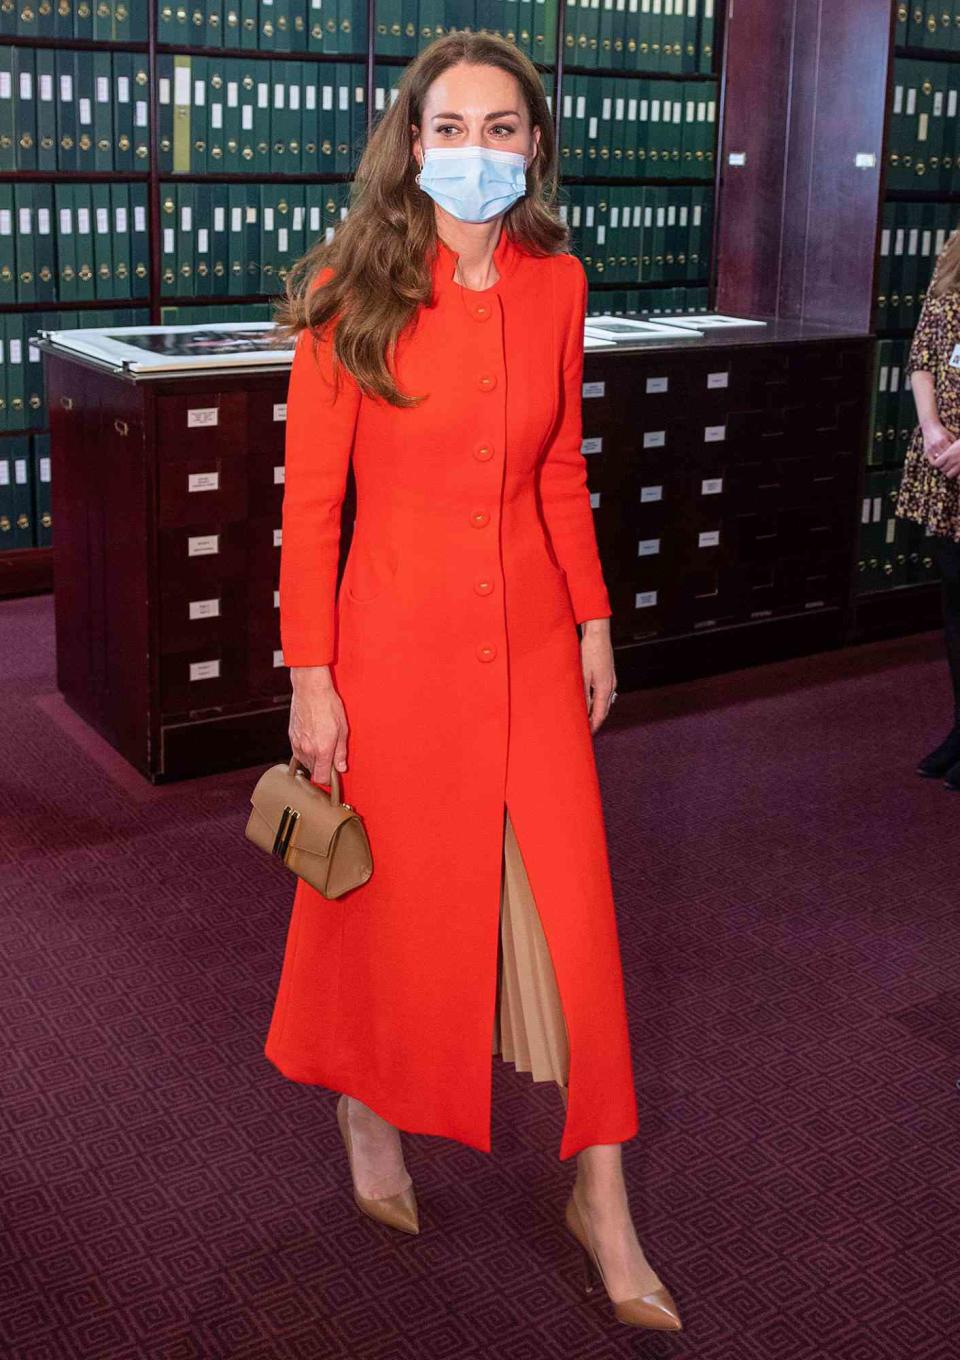 The Duchess of Cambridge during a visit to the archive in the National Portrait Gallery